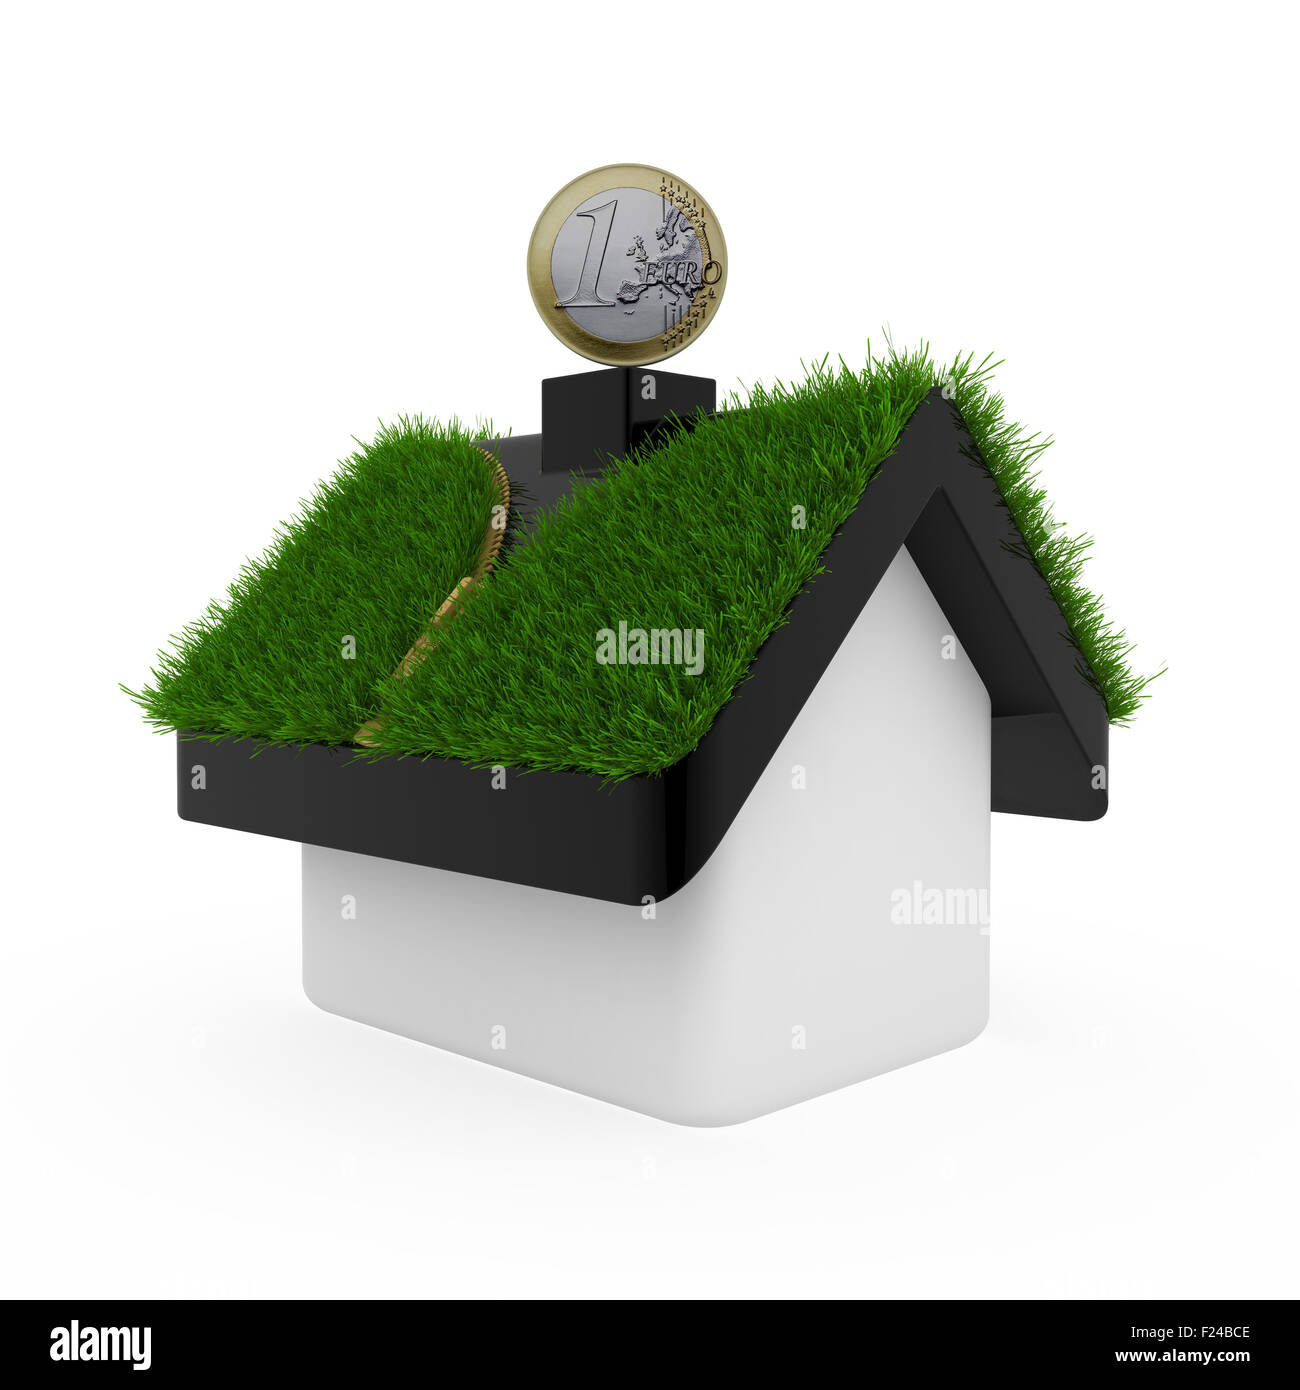 House with roof made of green grass and situated on top euro coins Stock Photo